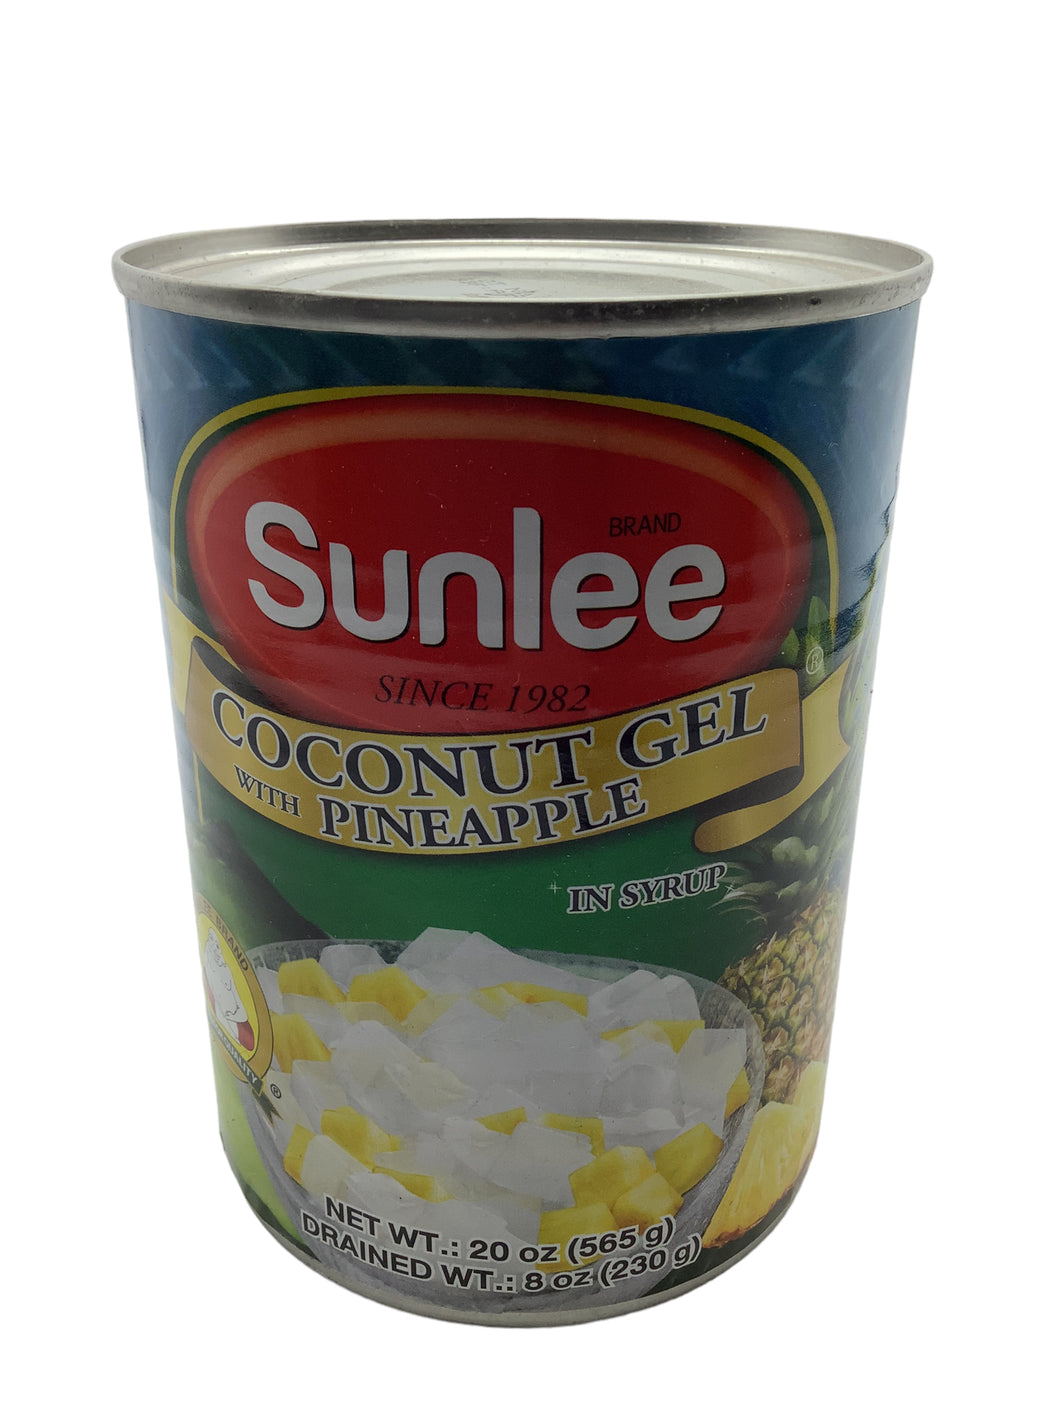 Sunlee Coconut Gel With Pineapple in Syrup